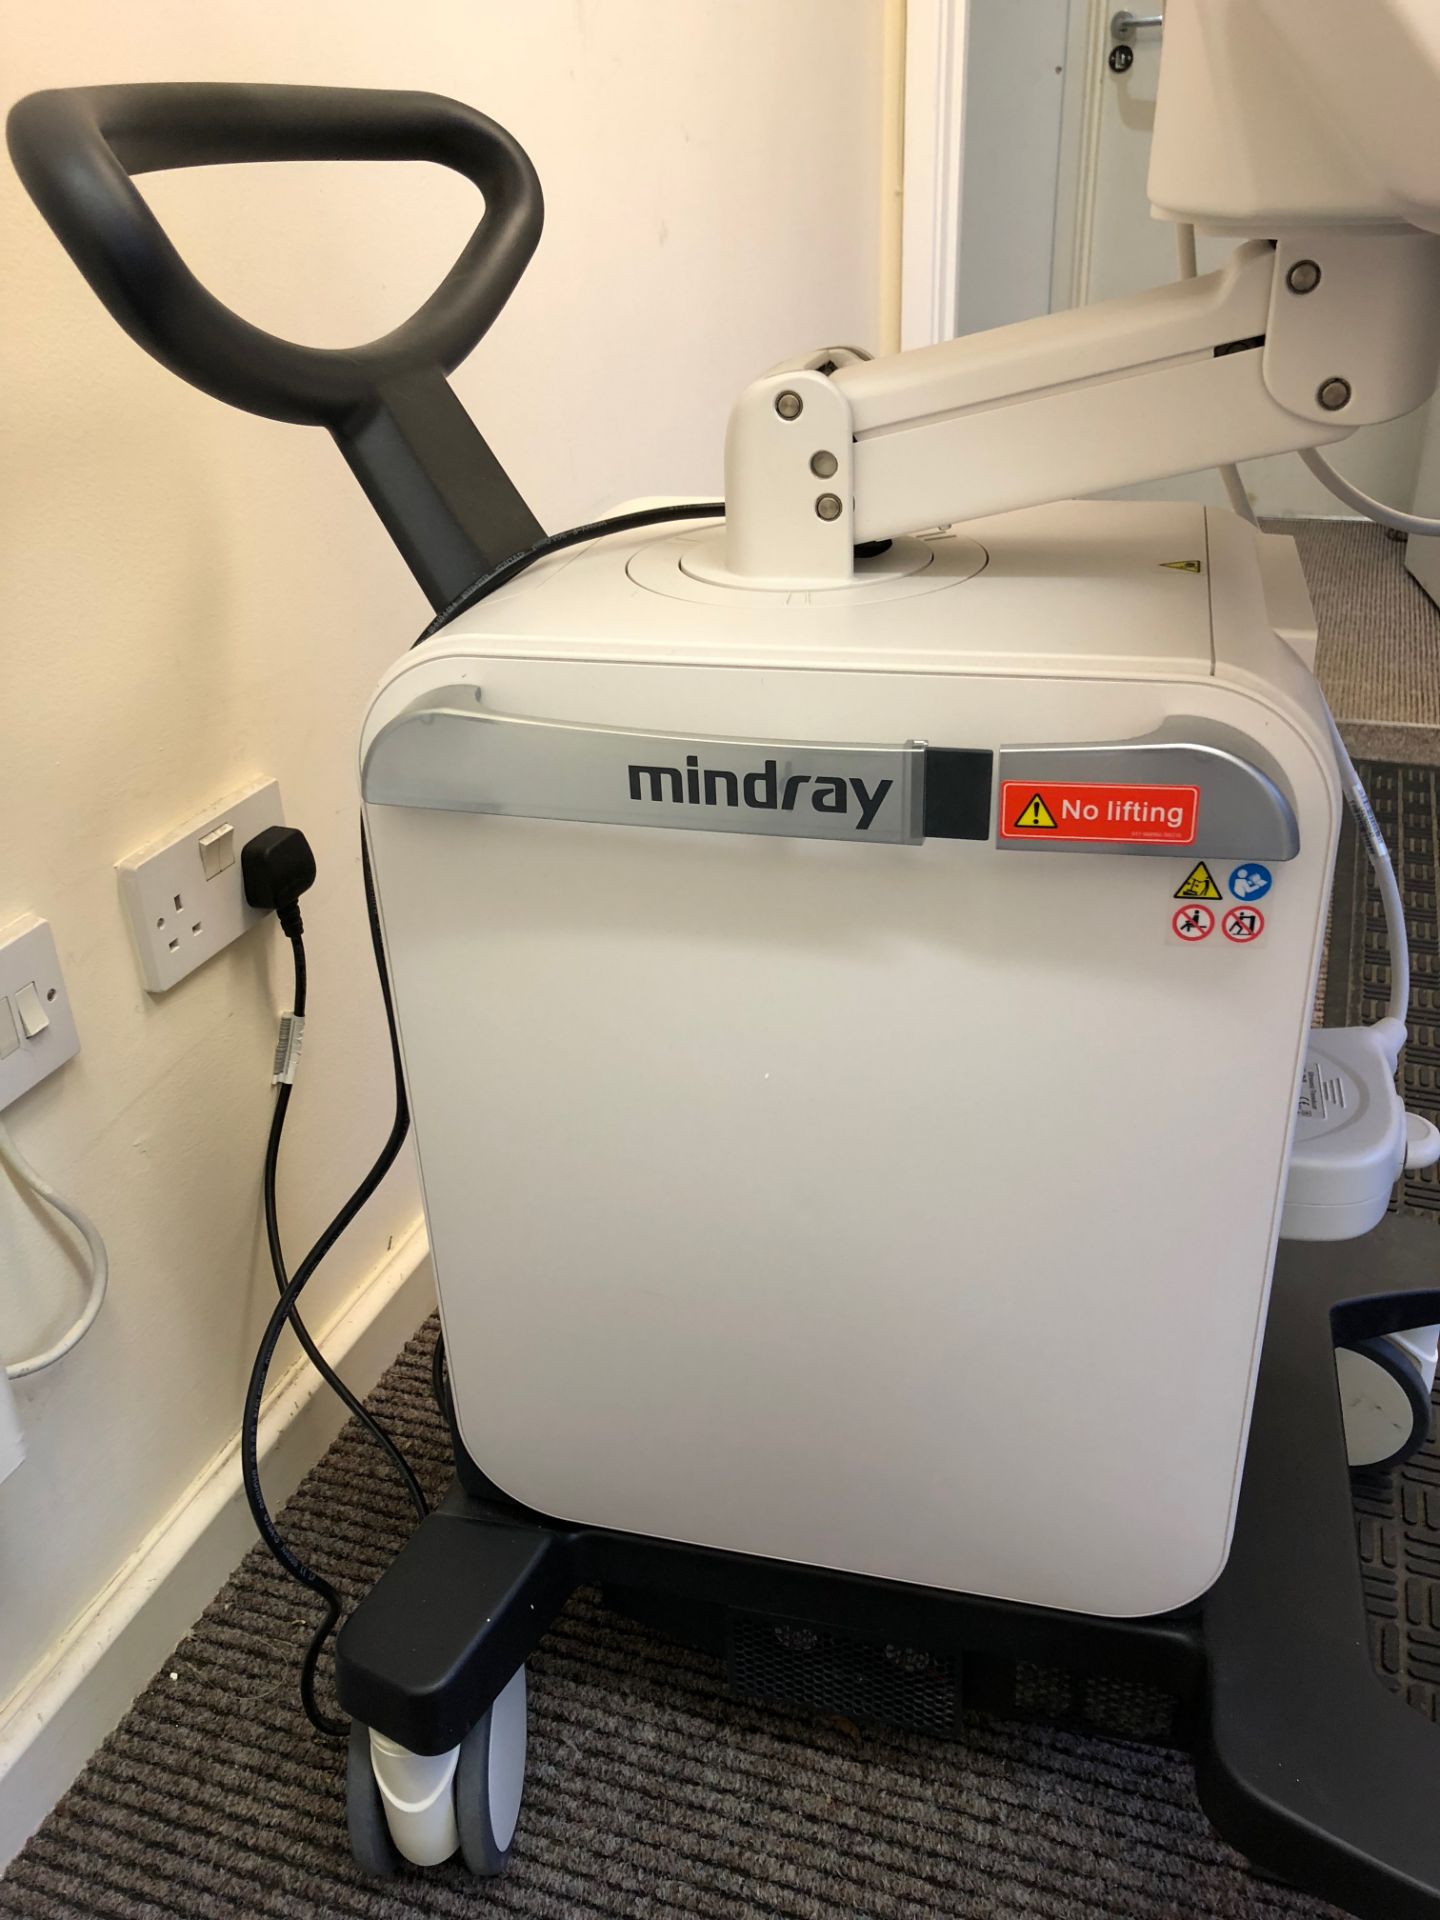 Mindray, DC-70 Ultrasound Complete with 4 Transducers - 4D system - Image 6 of 13